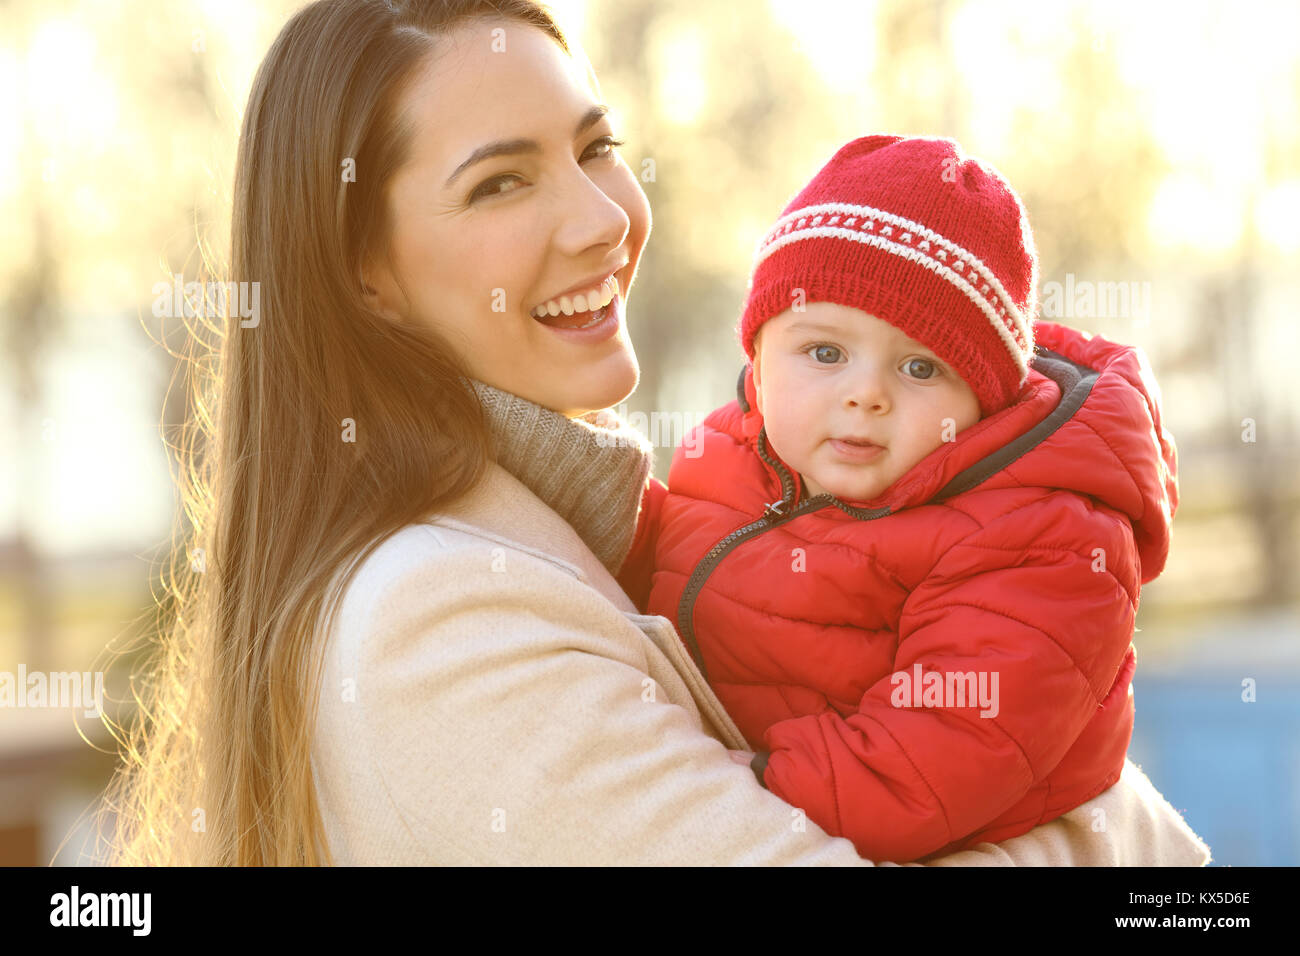 Portrait of a smiley mother posing with her baby keeping warm wearing a red jacket outdoors in winter Stock Photo